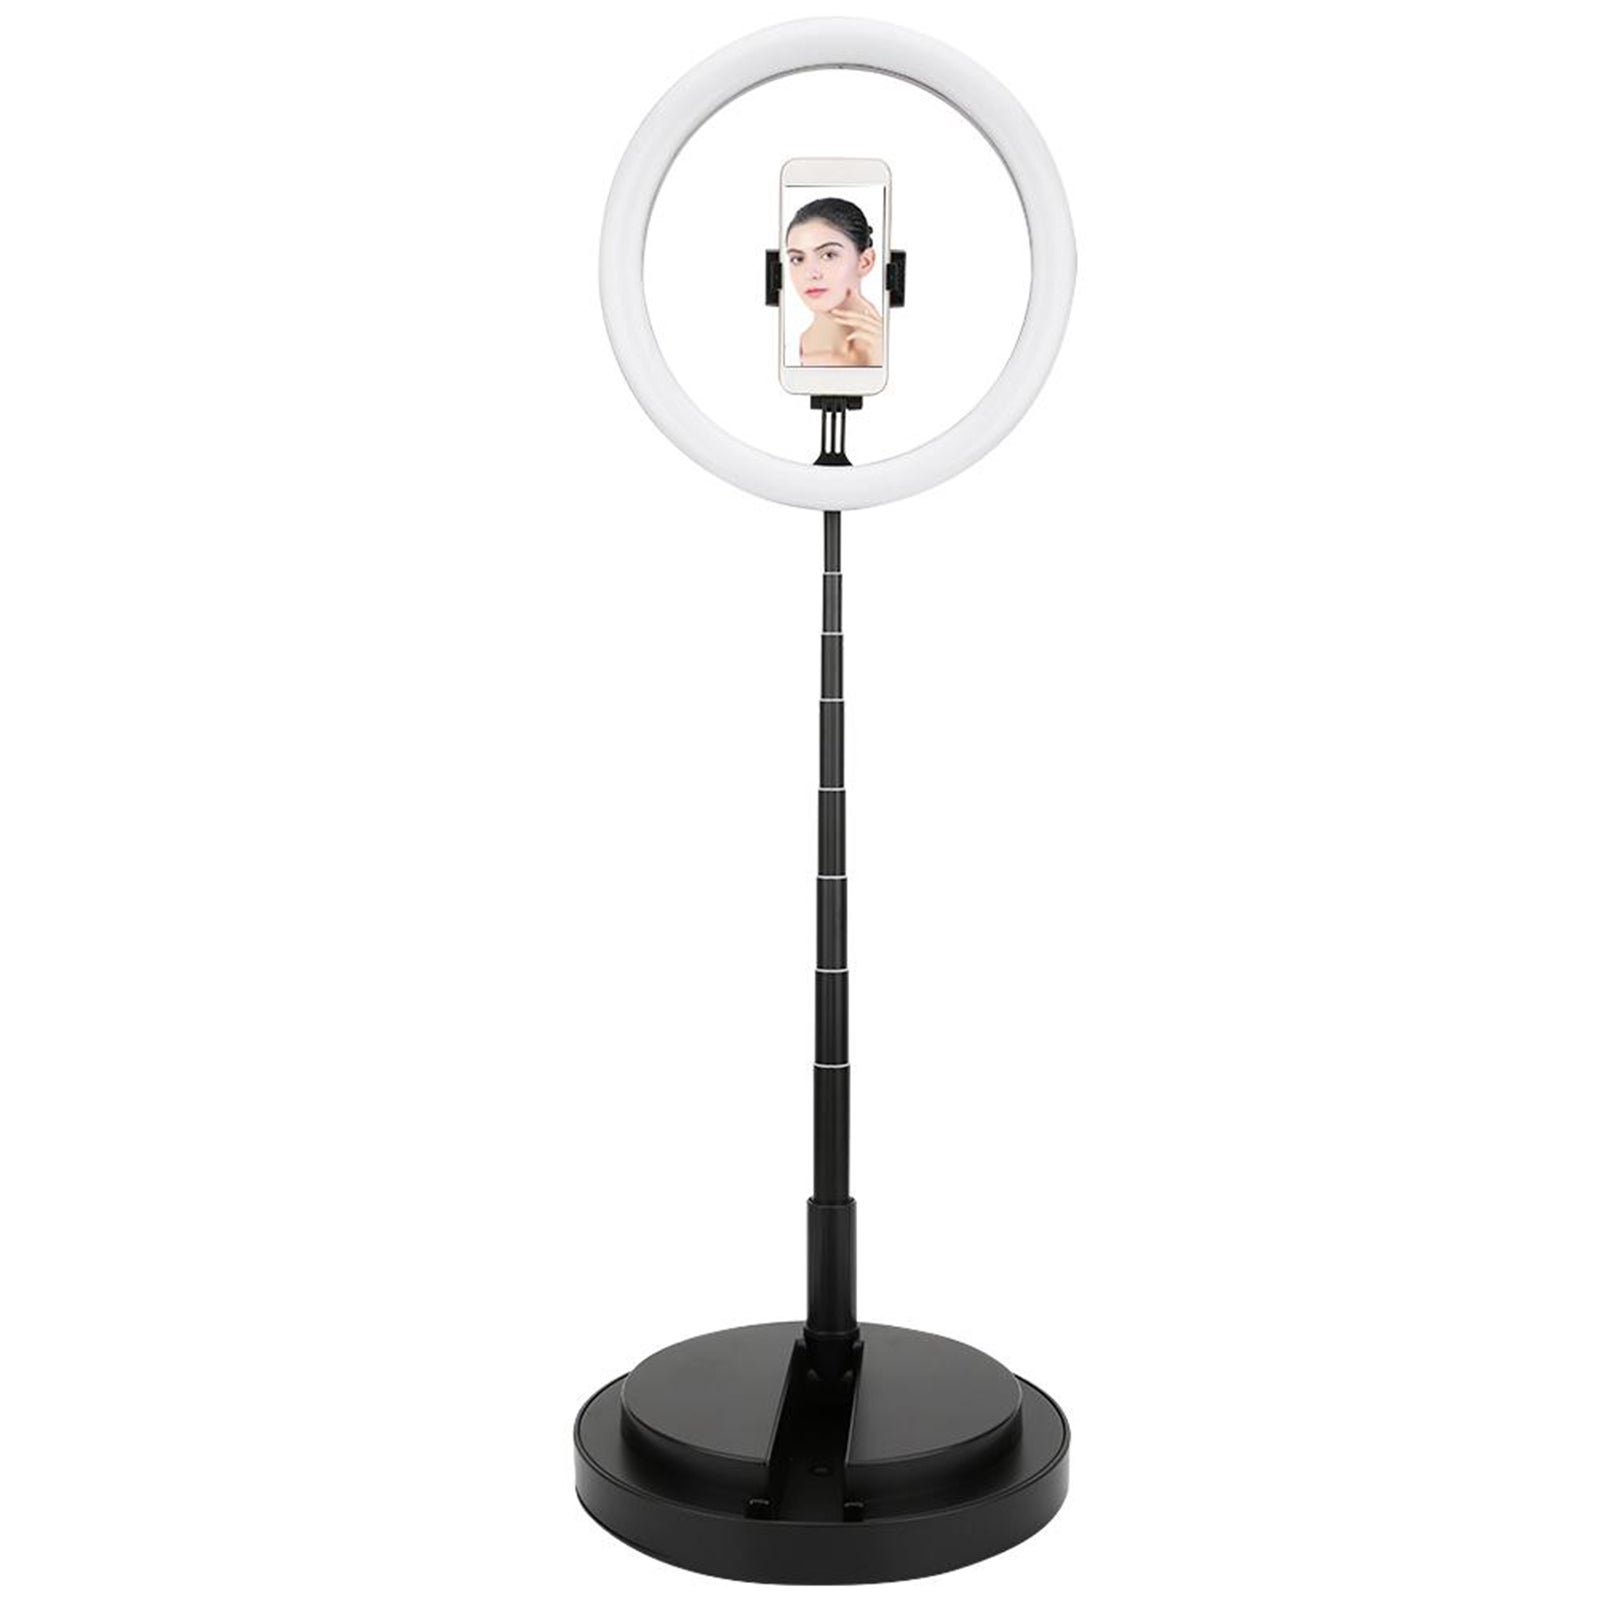 ACA Black Beauty LED Ring Light Remote control Lighting Camera Video Dimmable Lamp 6000K/11'